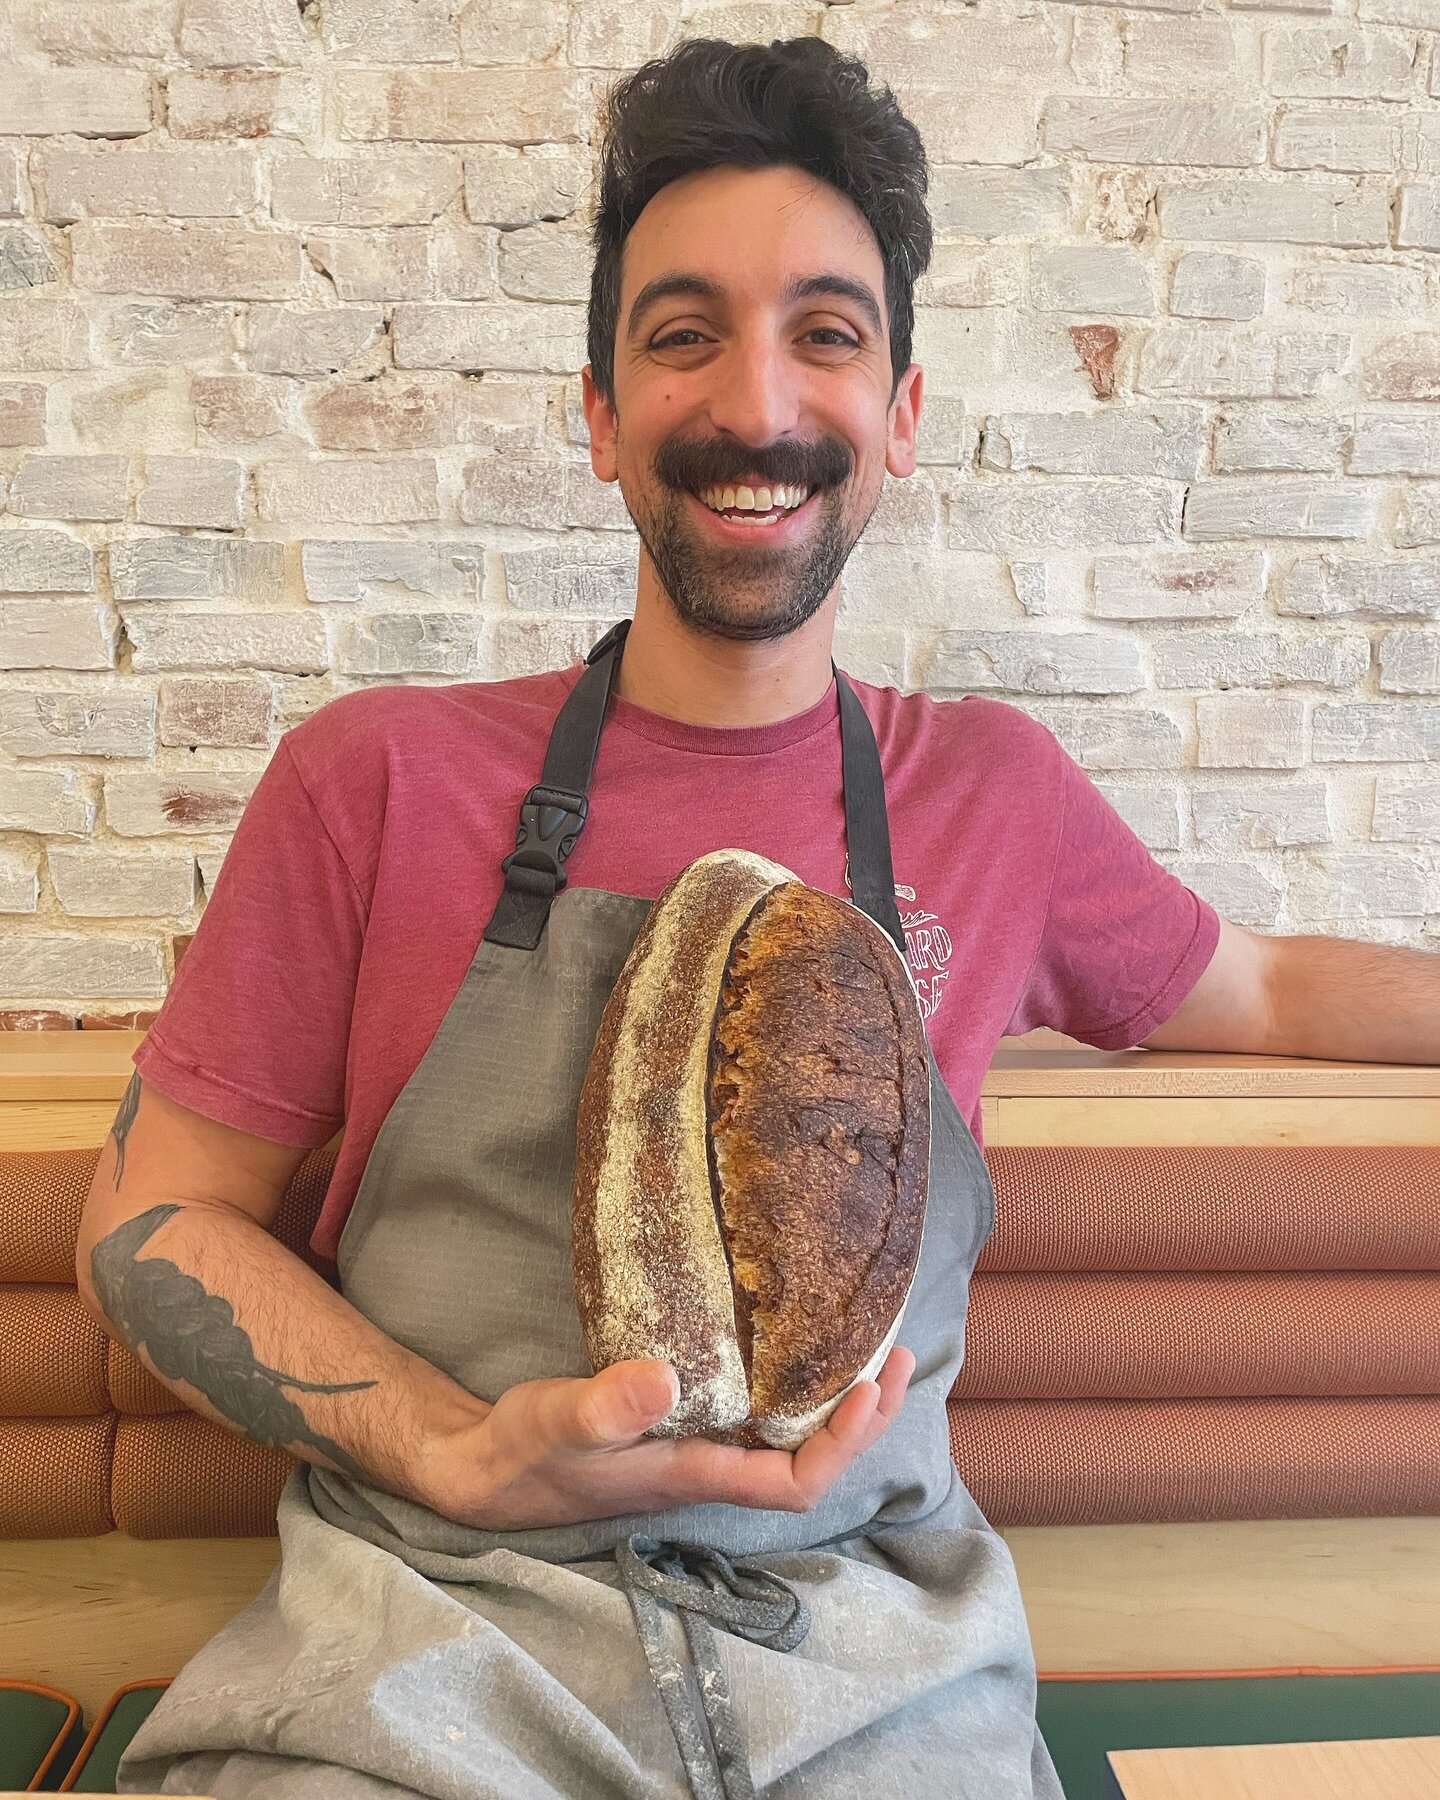 A happy baker with his bread! Open 8 - 1 today if you are in need of a loaf. 🥖